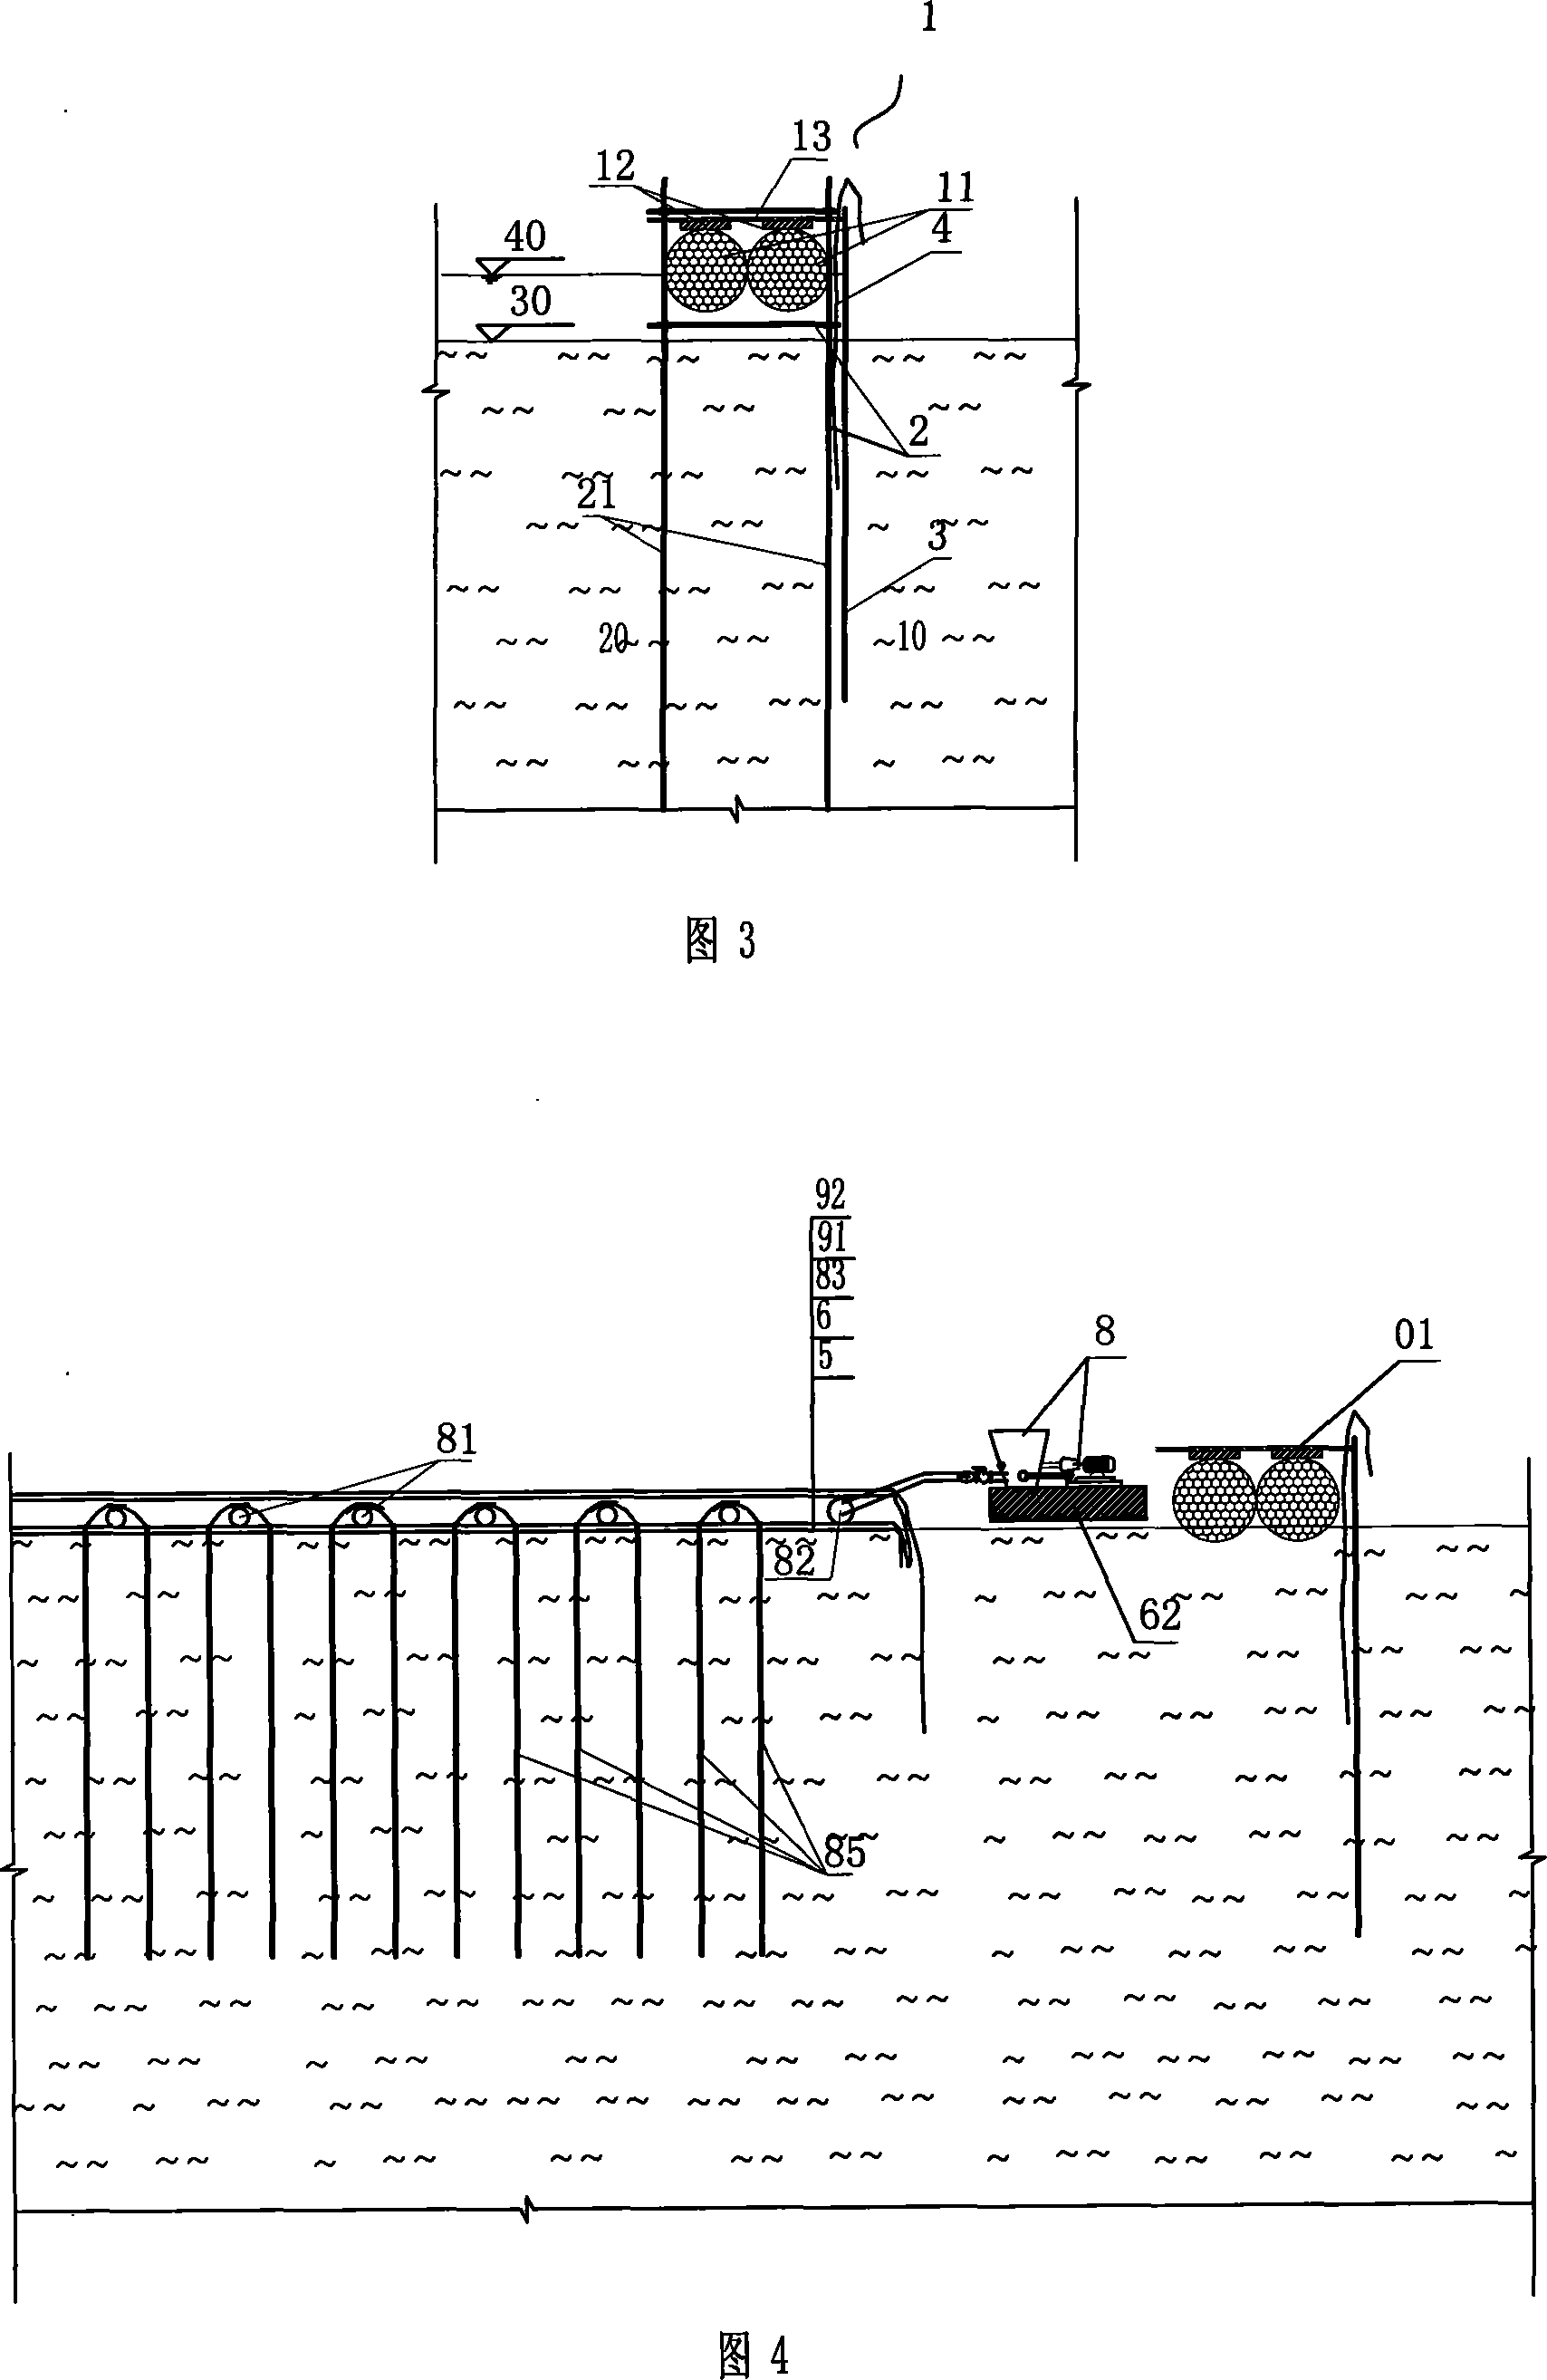 Method for rapidly reinforcing ultra-soft soil superficial layer